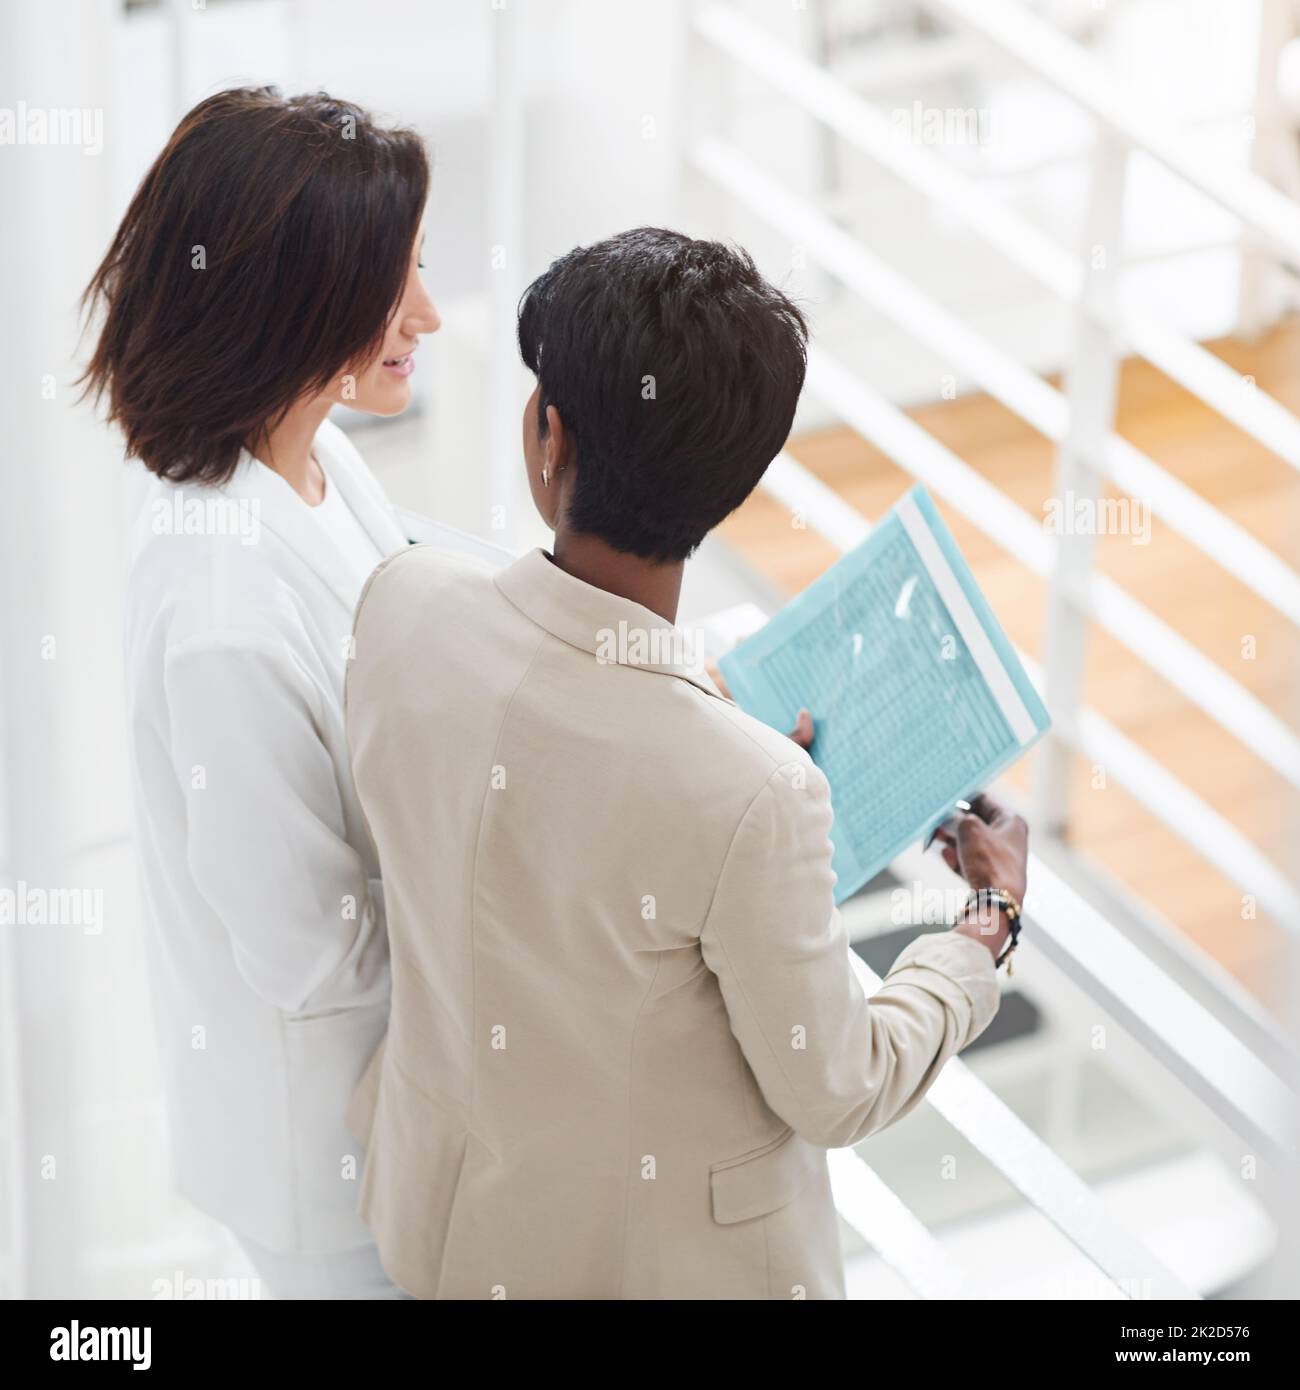 They share an ambitious drive. Shot of two businesswomen standing in an office. Stock Photo